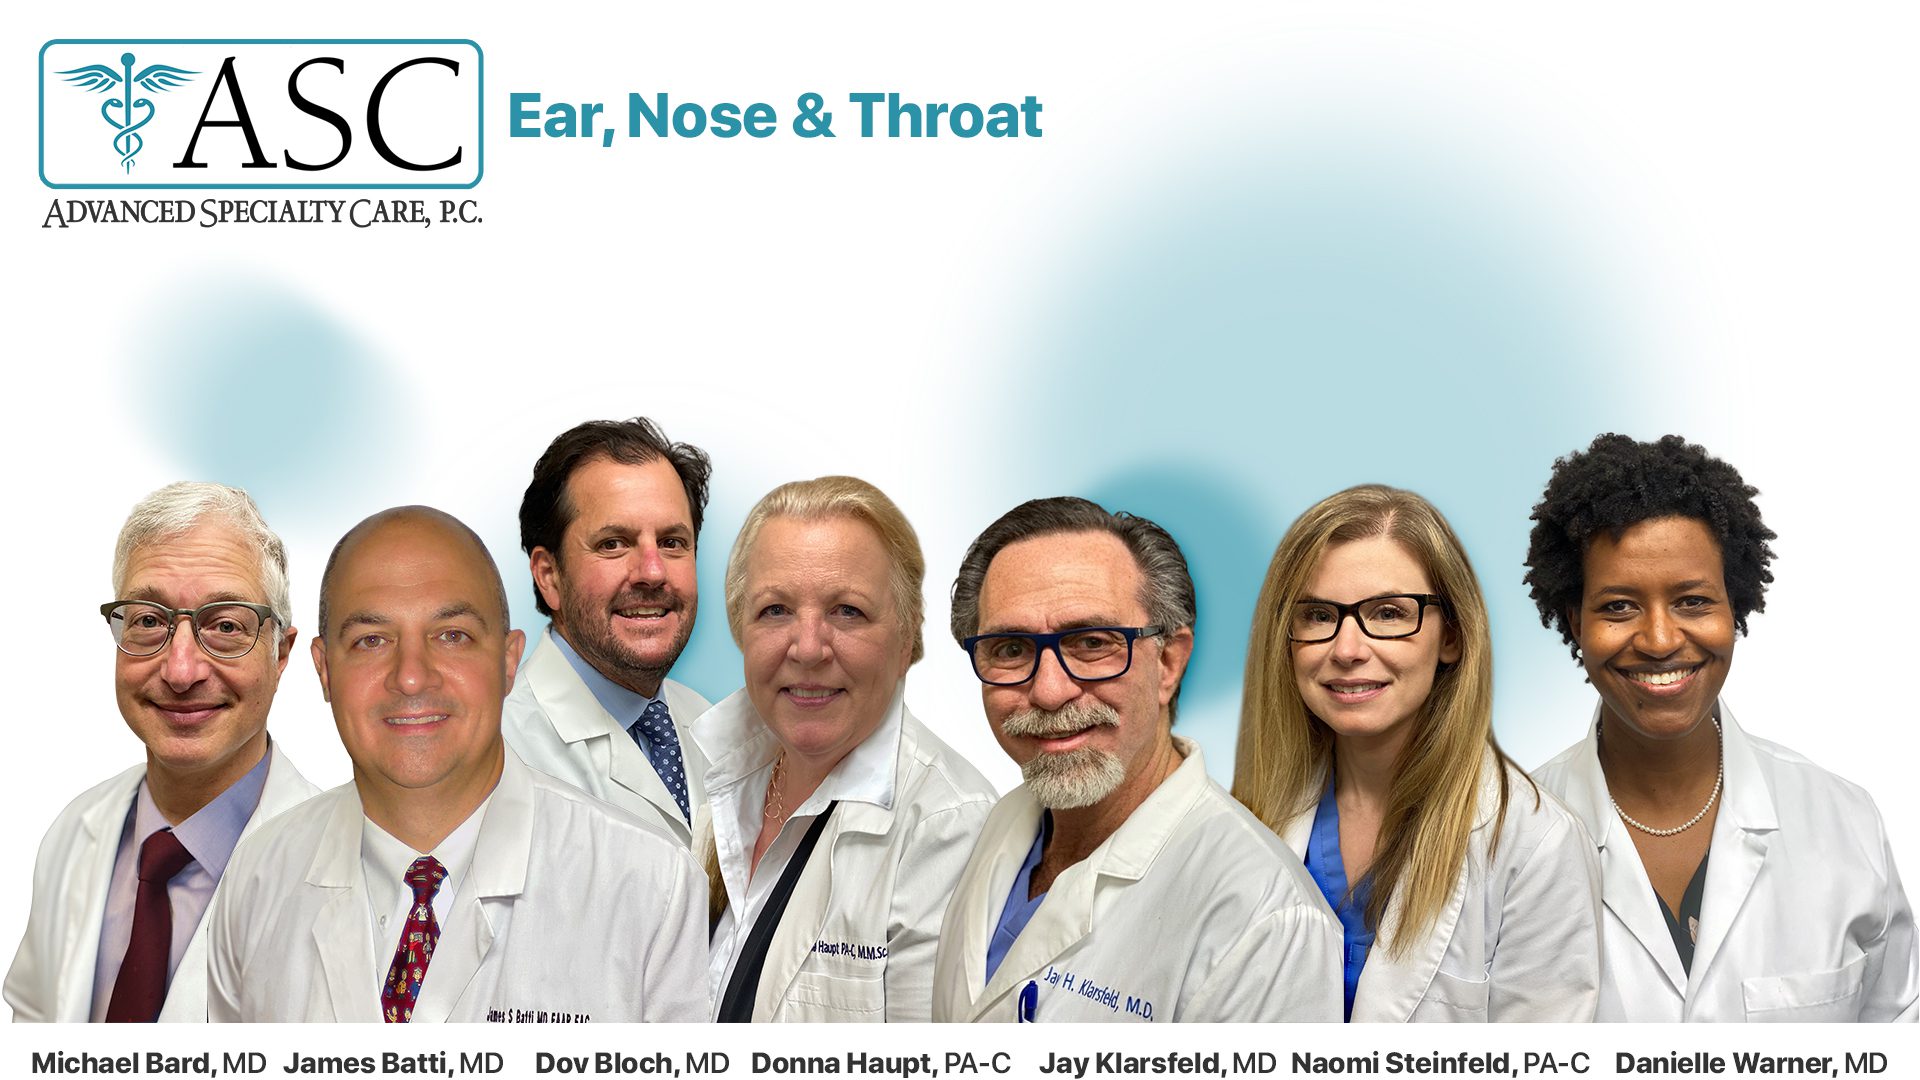 Advanced Specialty Care's Ear, Nose & Throat specialists--Drs. Michael Bard, James Batti, Dov Bloch, Jay Klarsfeld, Danielle Warner, and PAs Donna Haupt and Naomi Steinfeld.